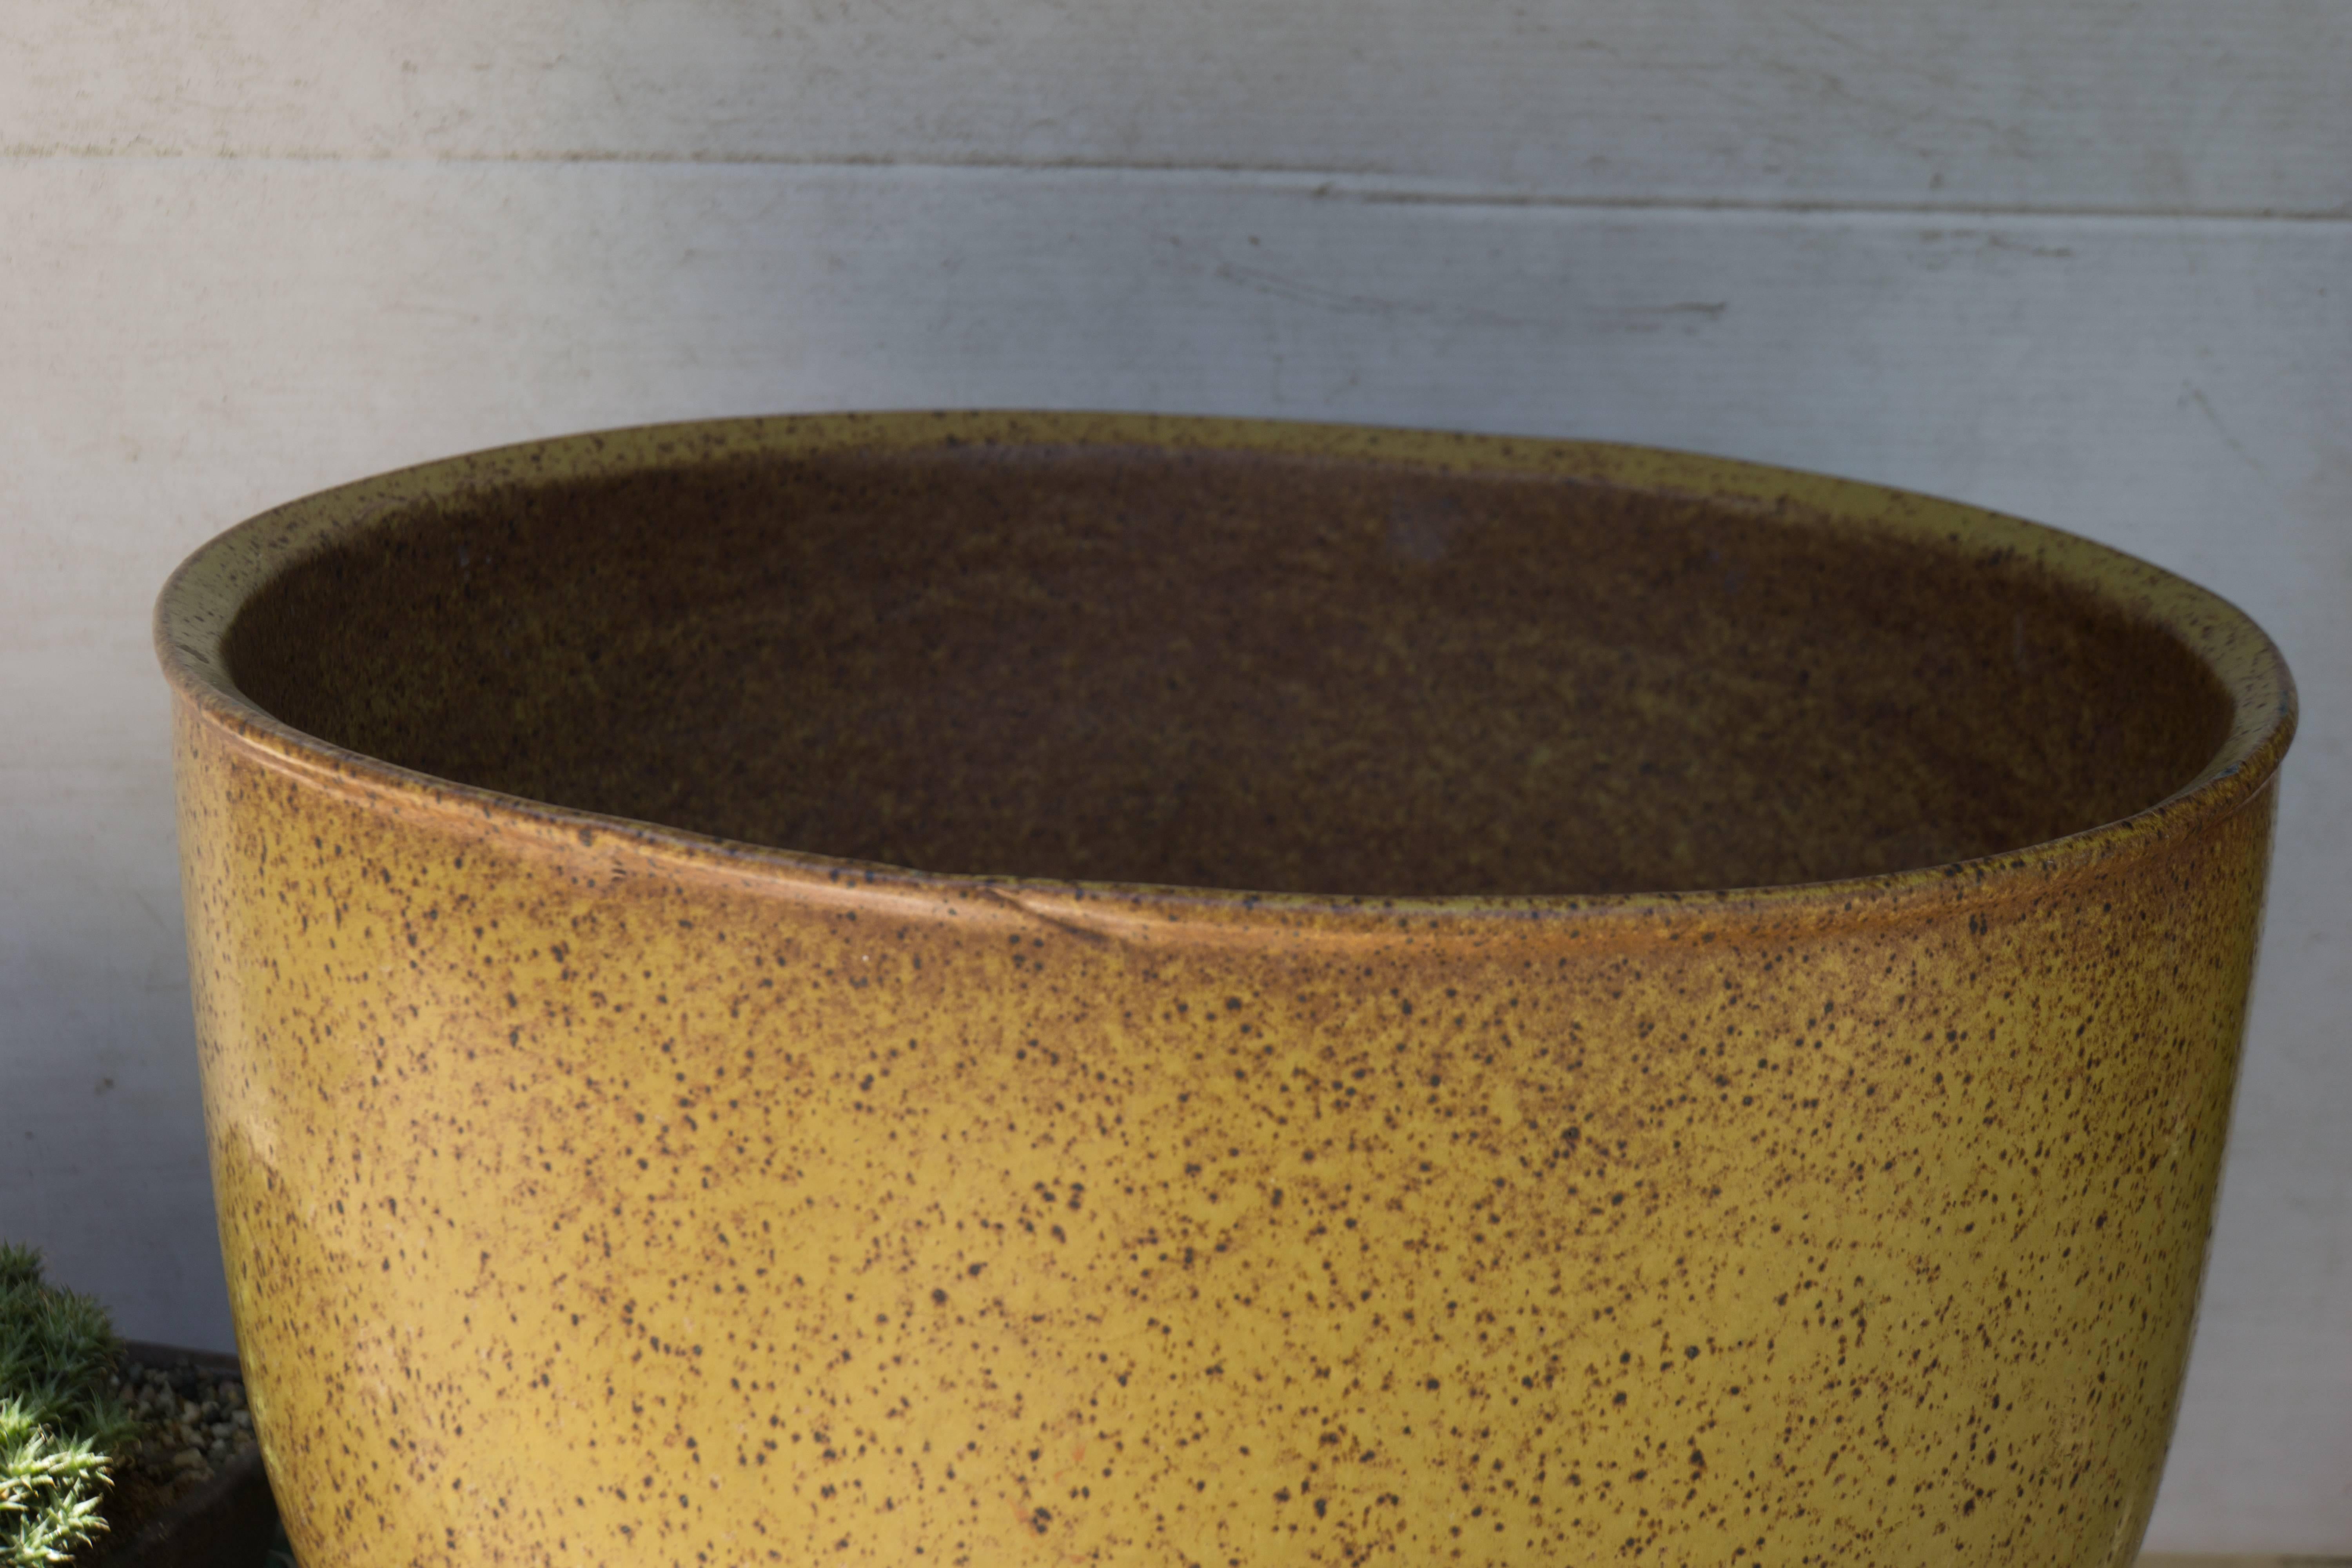 Mid-Century Modern American
David Cressey bell planter for Architectural Pottery
Measures: 20.5